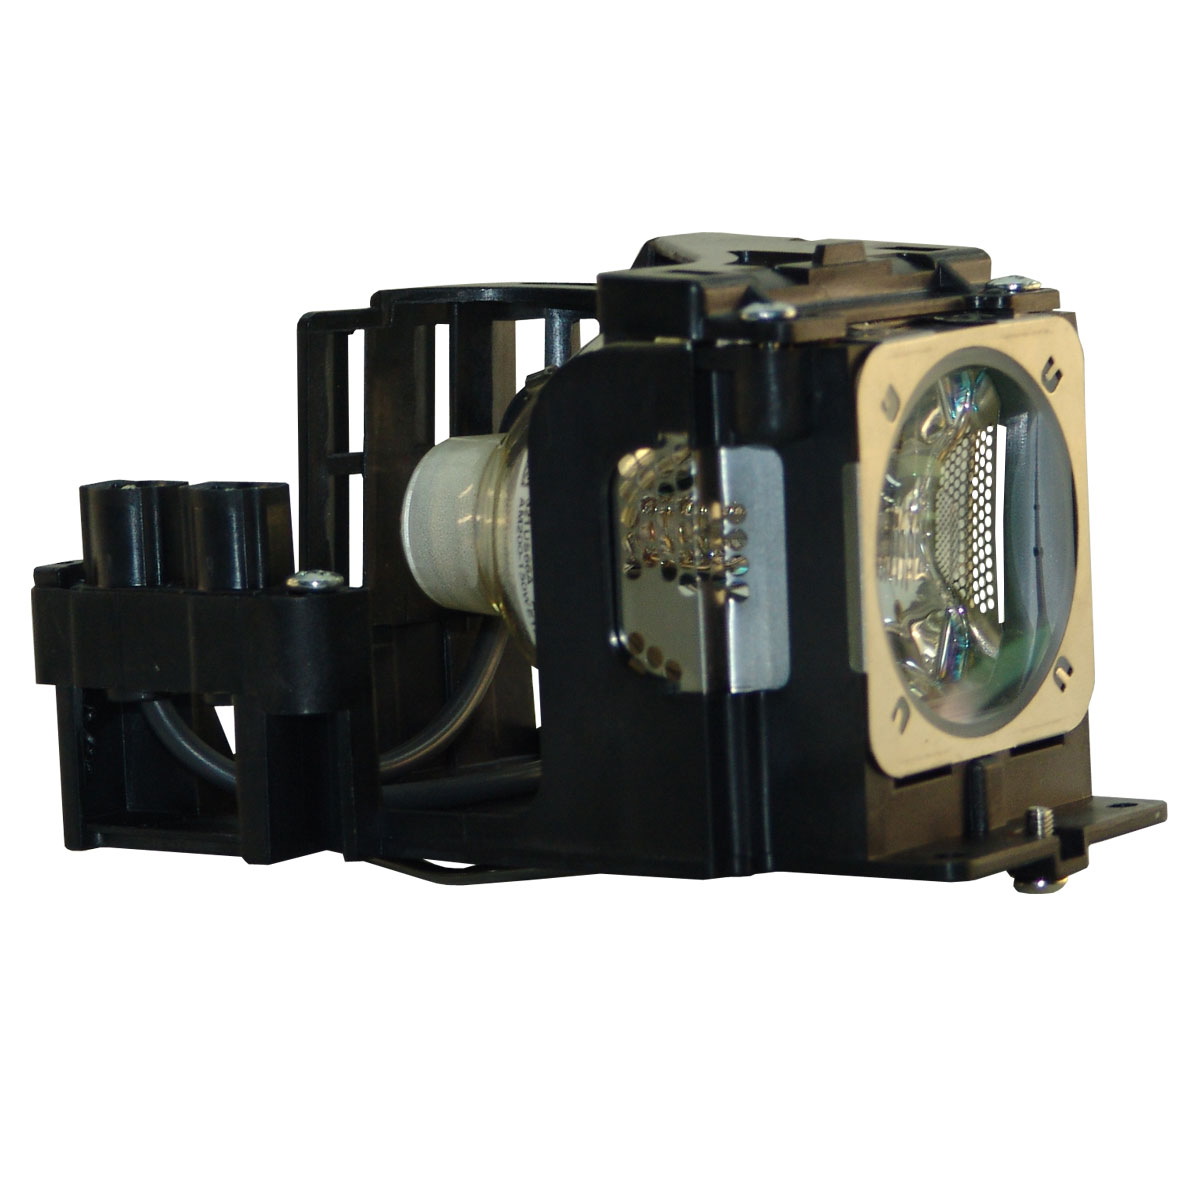 OEM 610-334-9565 Replacement Lamp & Housing for Sanyo Projectors - image 1 of 6